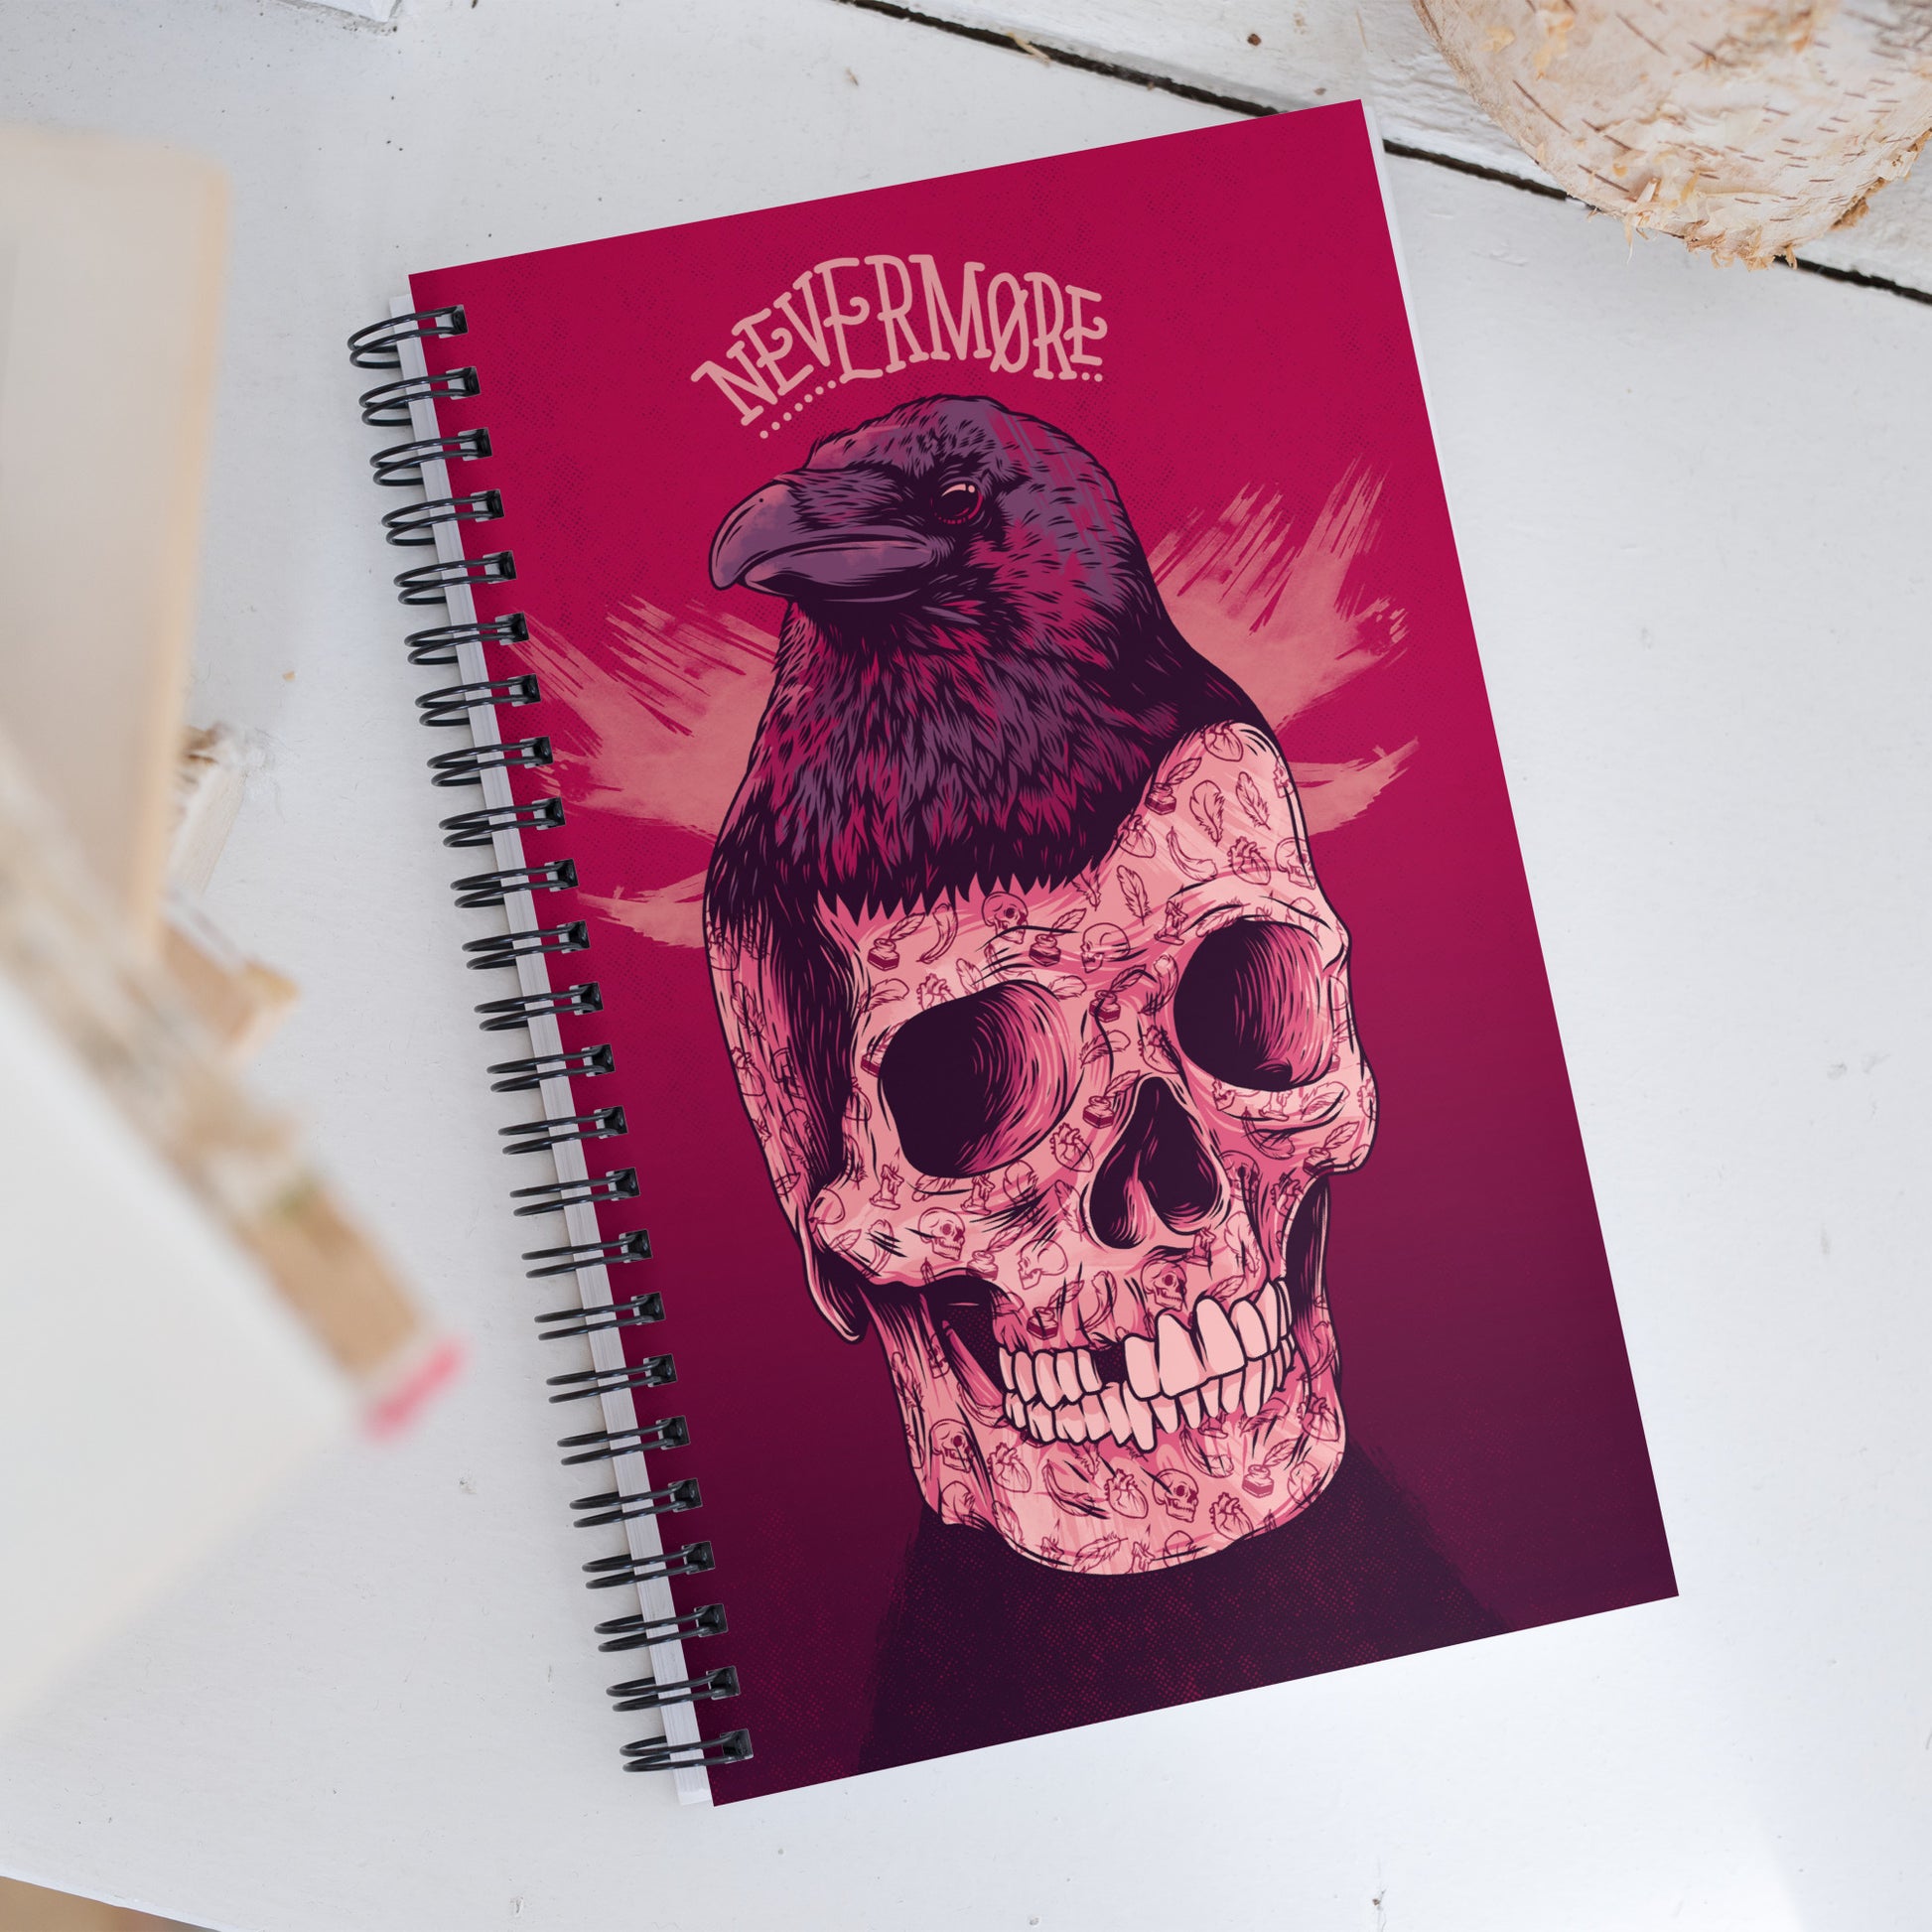 Edgar Allan Poe Skull & Raven Illustrated Spiral Notebook for Writing and Note-Taking